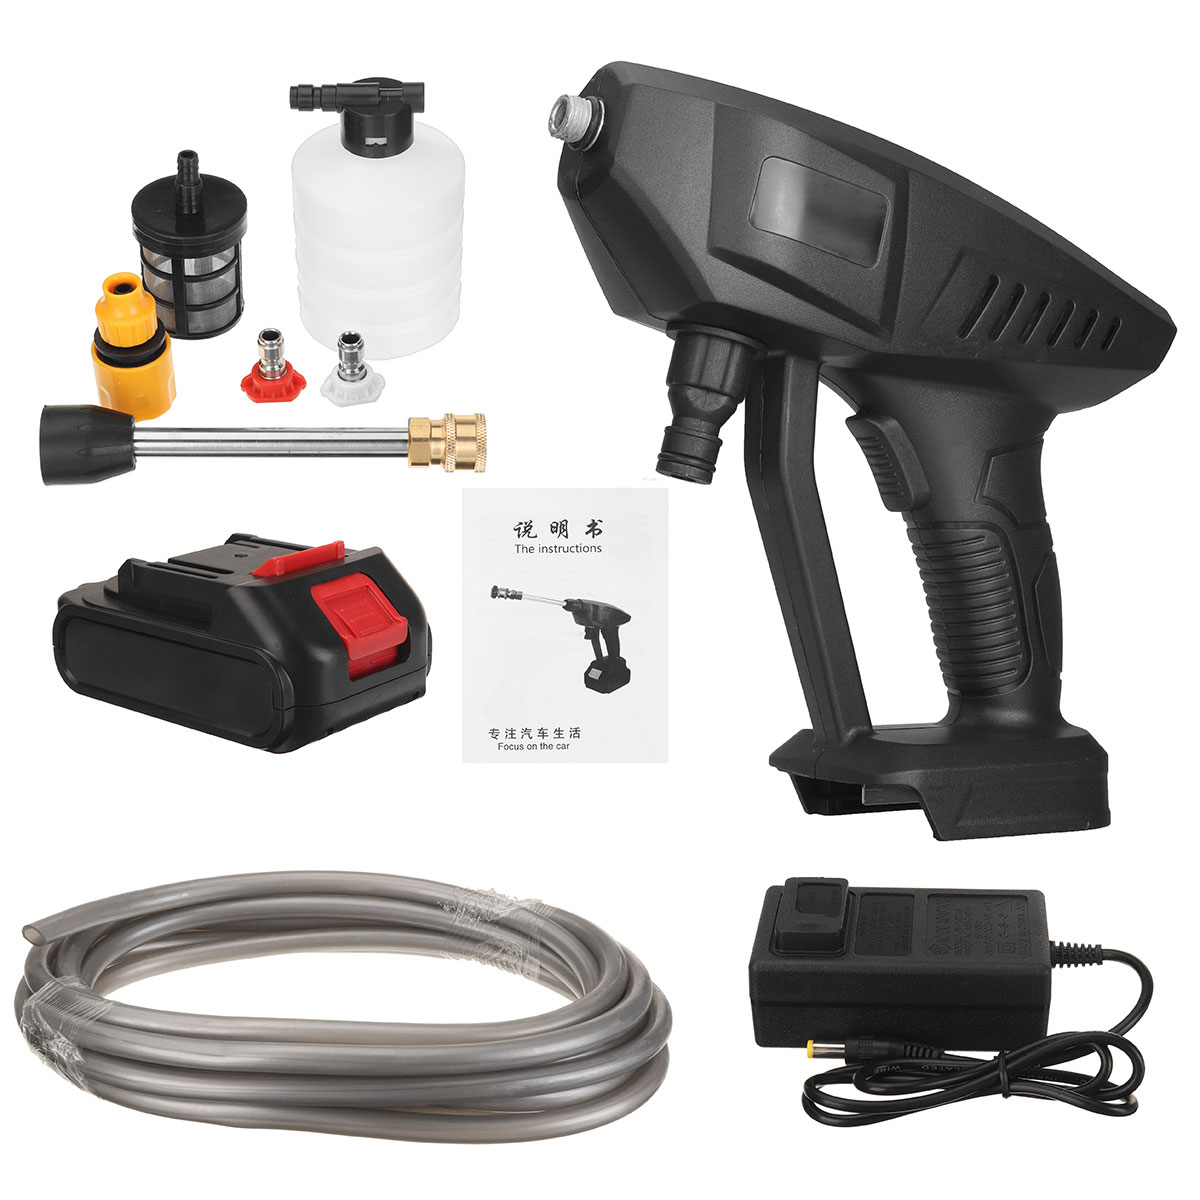 288VF-Cordless-Electric-High-Pressure-Washer-Car-Cleaner-Water-Spray-Guns-Water-Hose-Cleaning-Washin-1869047-16